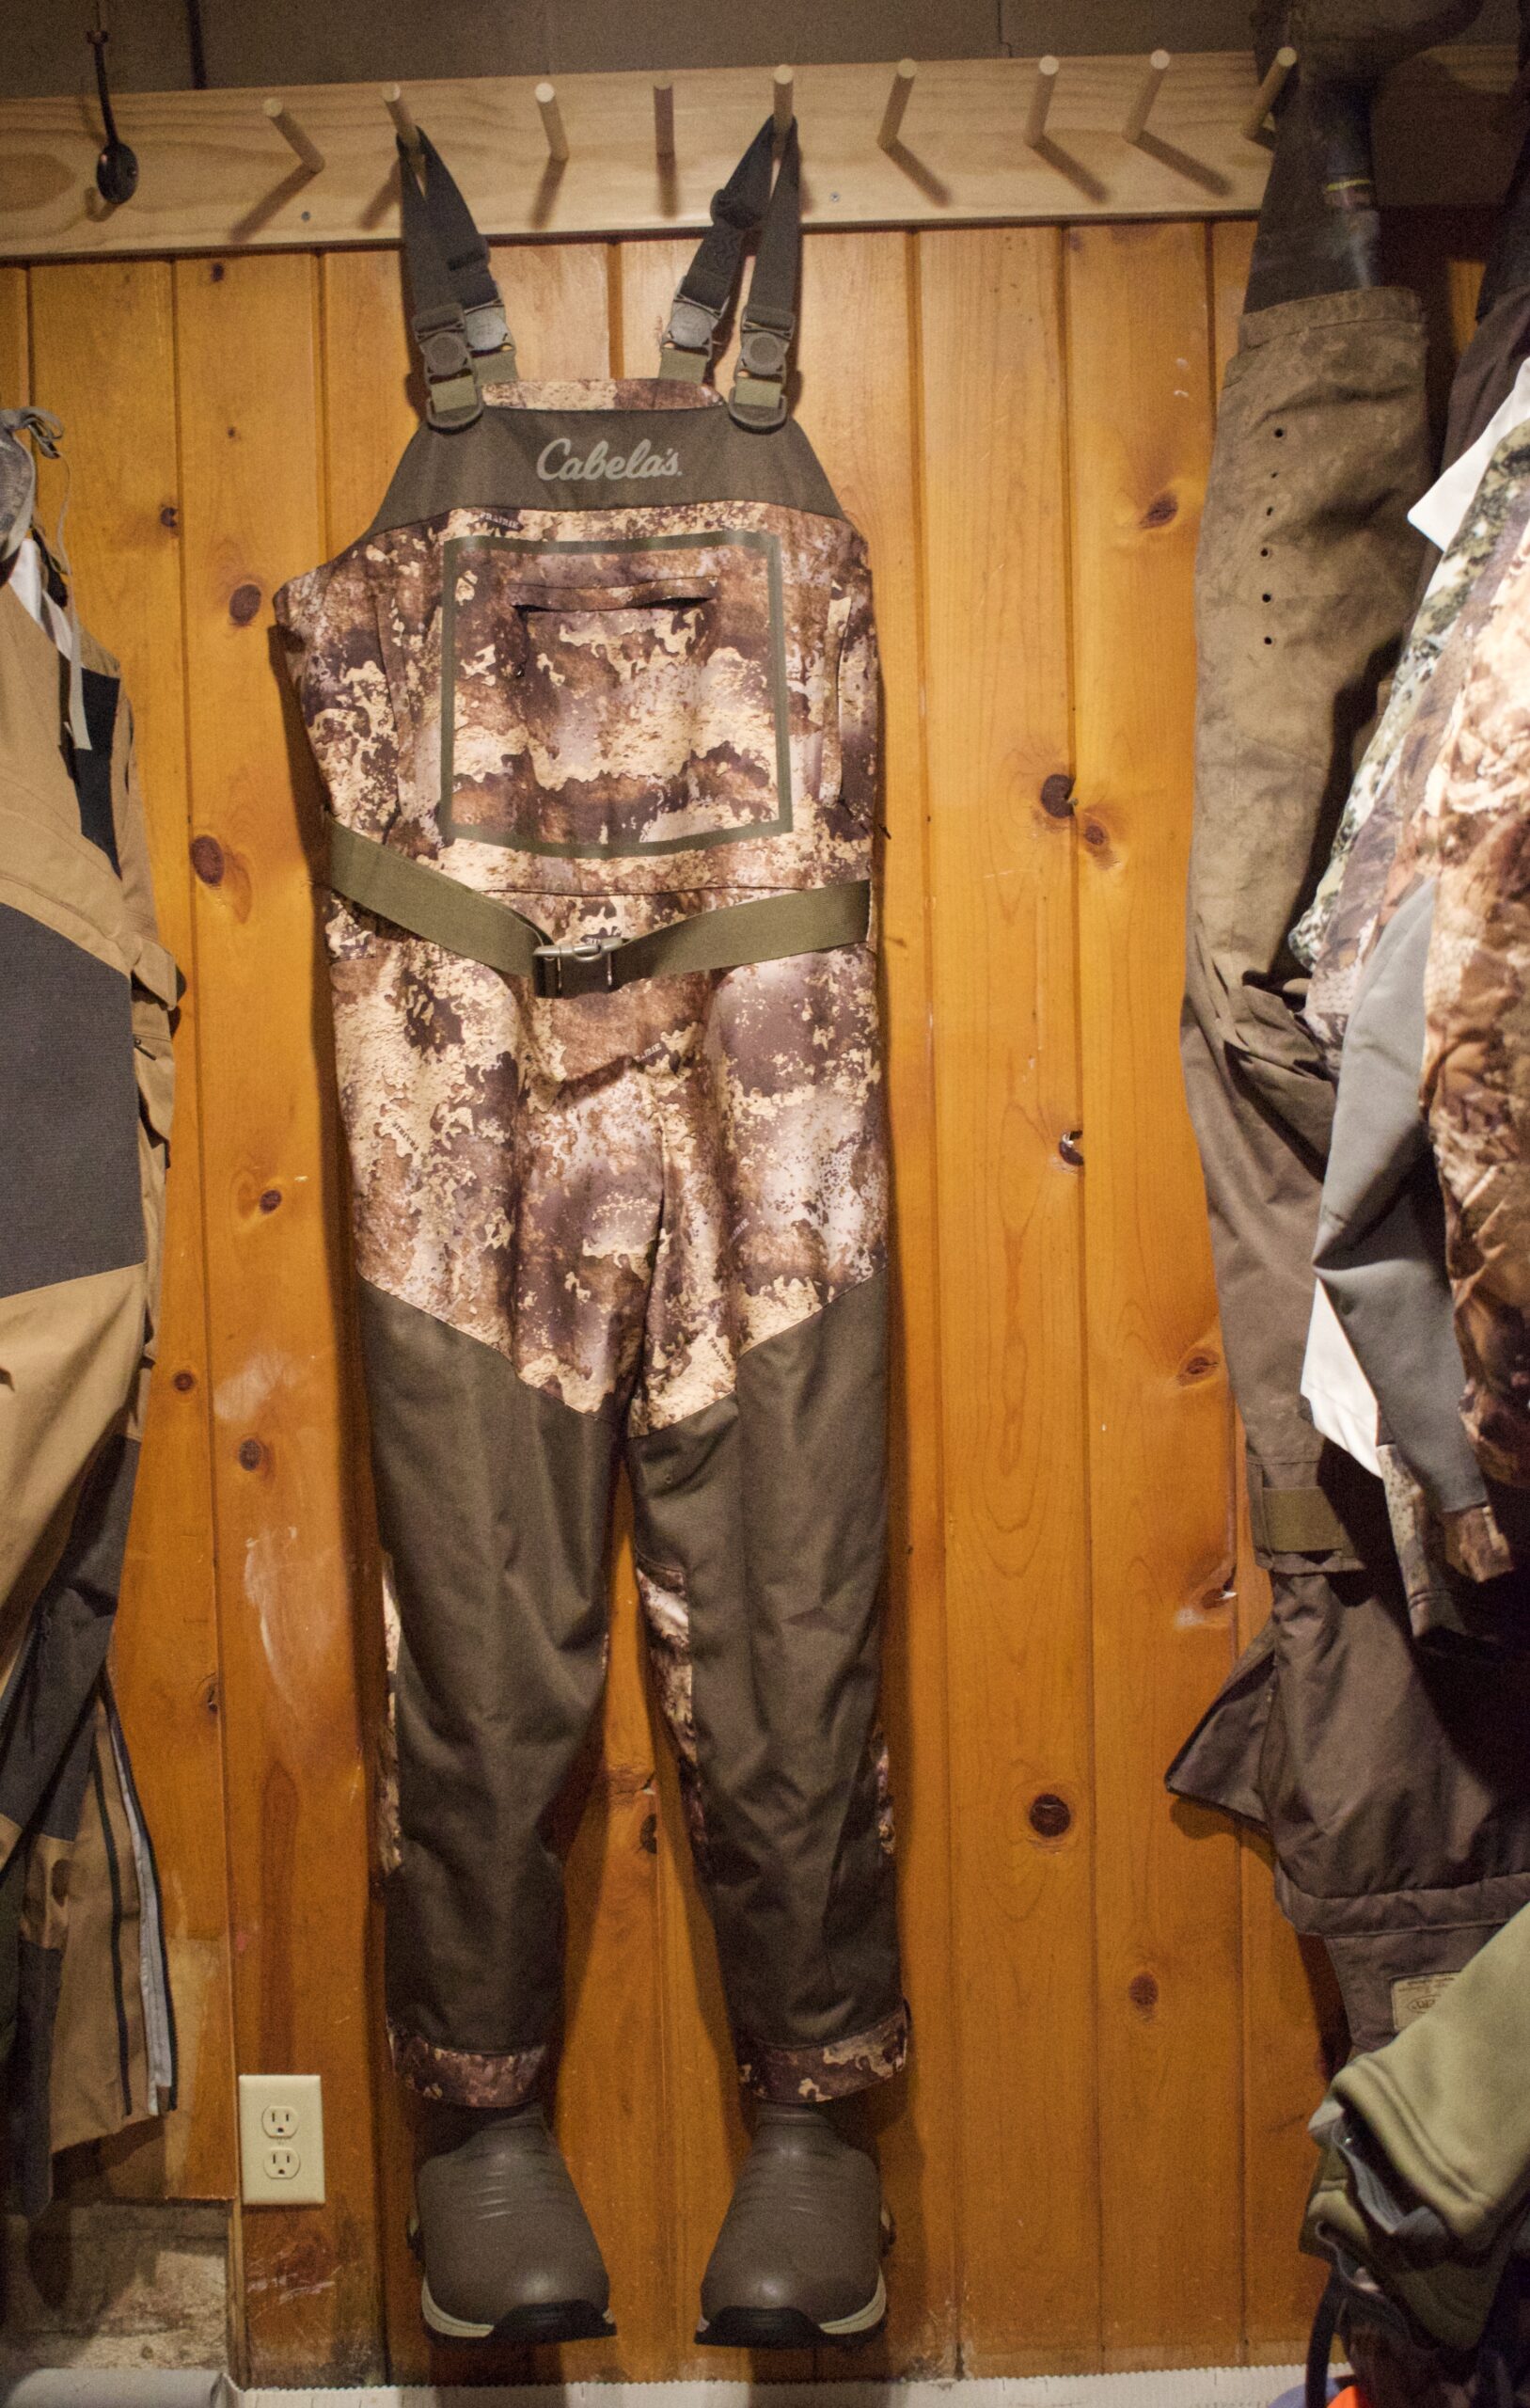 A pair of Cabela's waders hanging in a wood closet